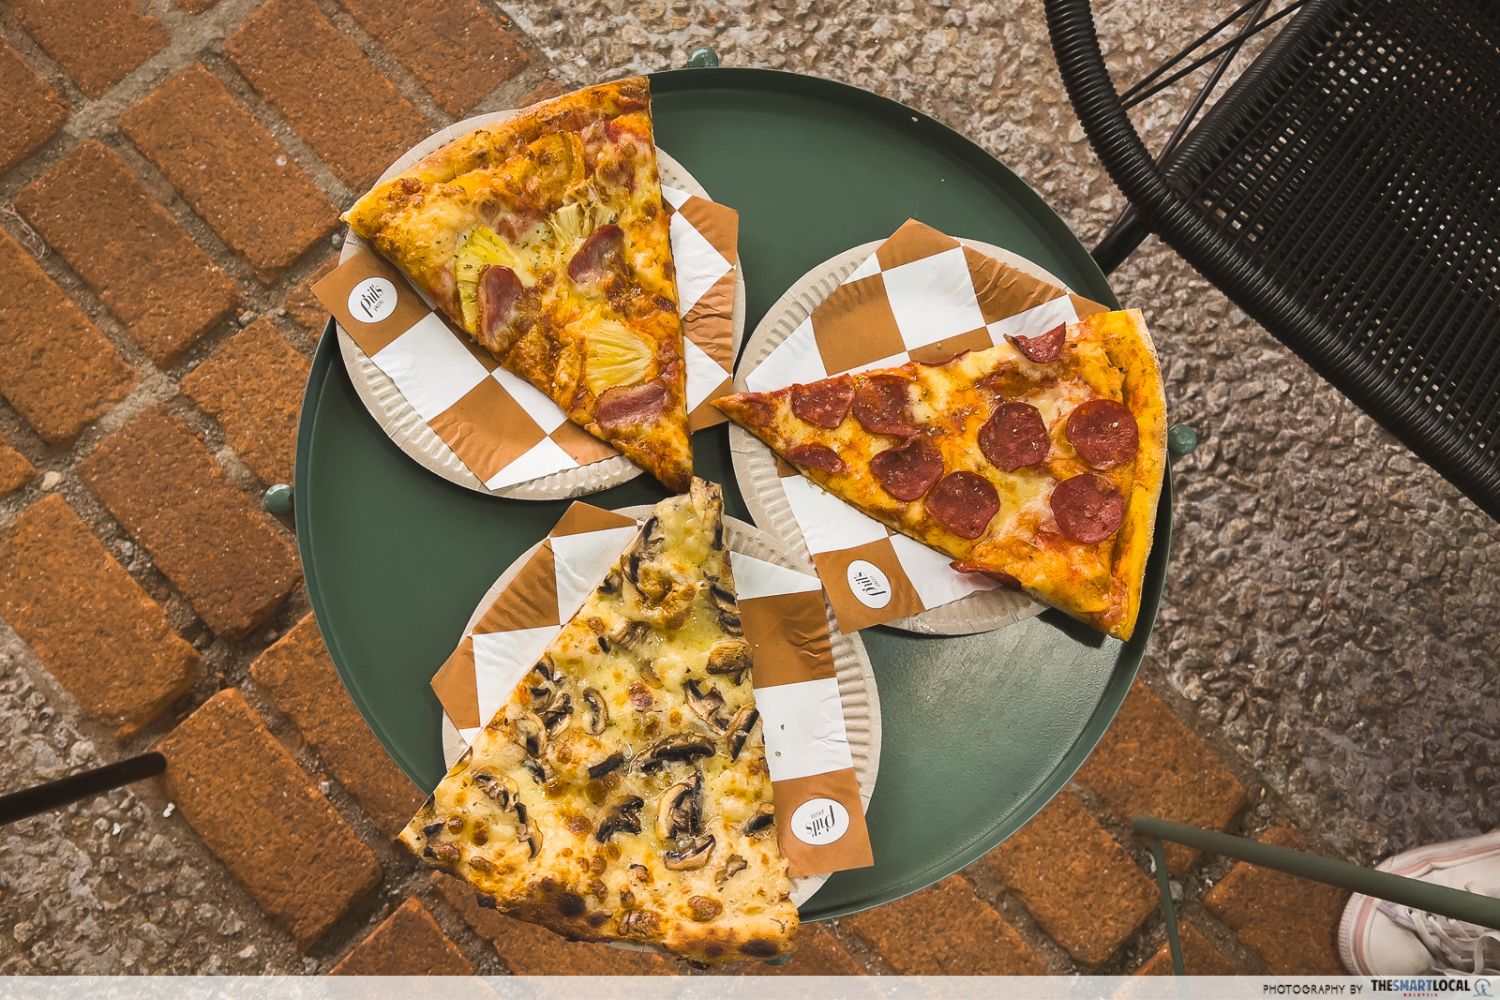 three indvidual slices of pizza on separate plates, there are pepperoni, pineapple sugus, and truffle pizzas